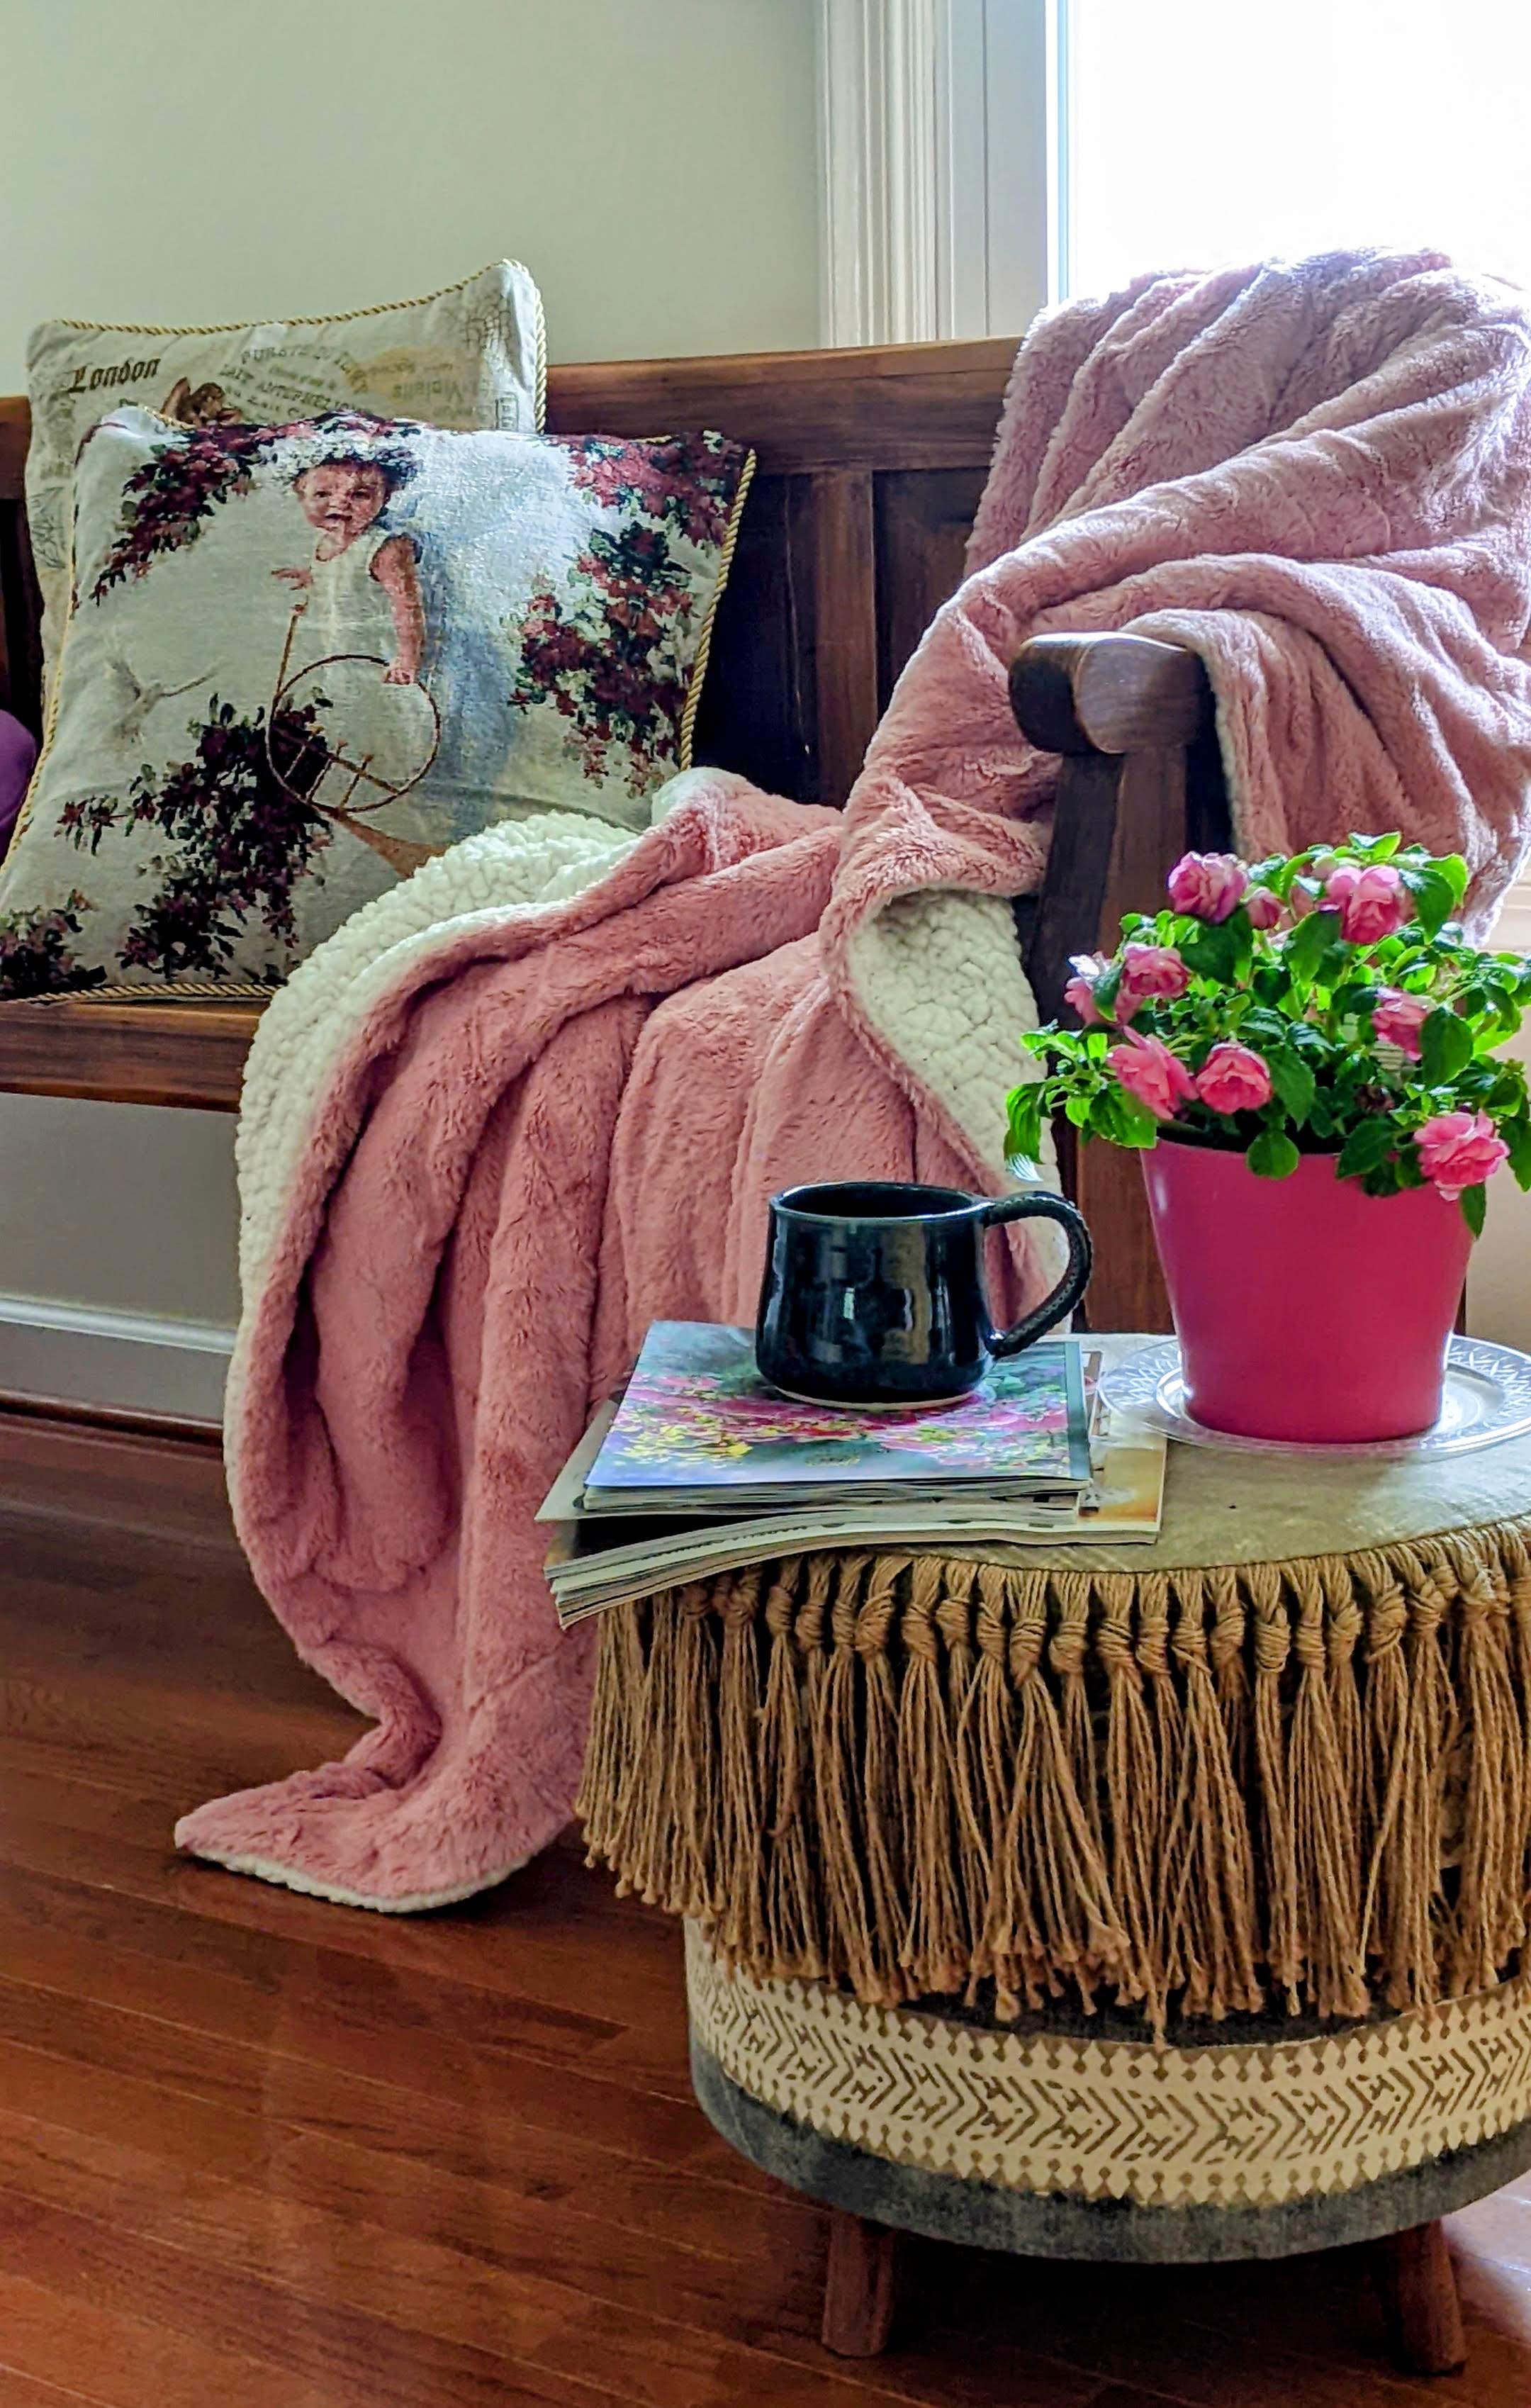 A soft pink blanket draped over a chair next to an ottoman with magazines and a cup of coffee on it